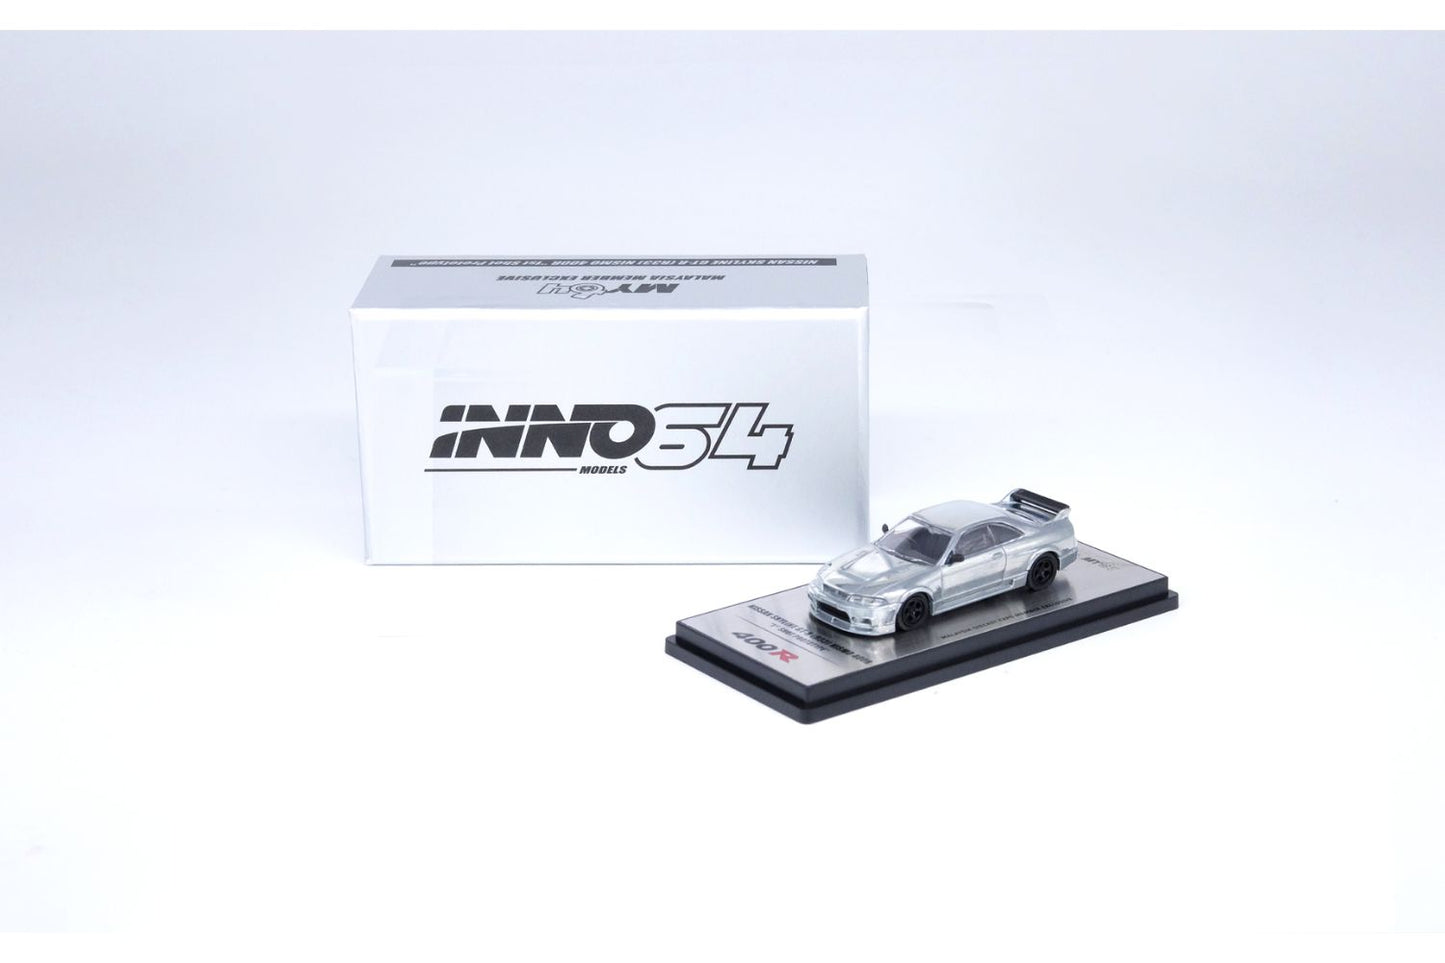 Inno64 Nissan Skyline GT-R (R33) Nismo 400R "1st Shot Prototype" Malaysia Diecast Expo Member Exclusive